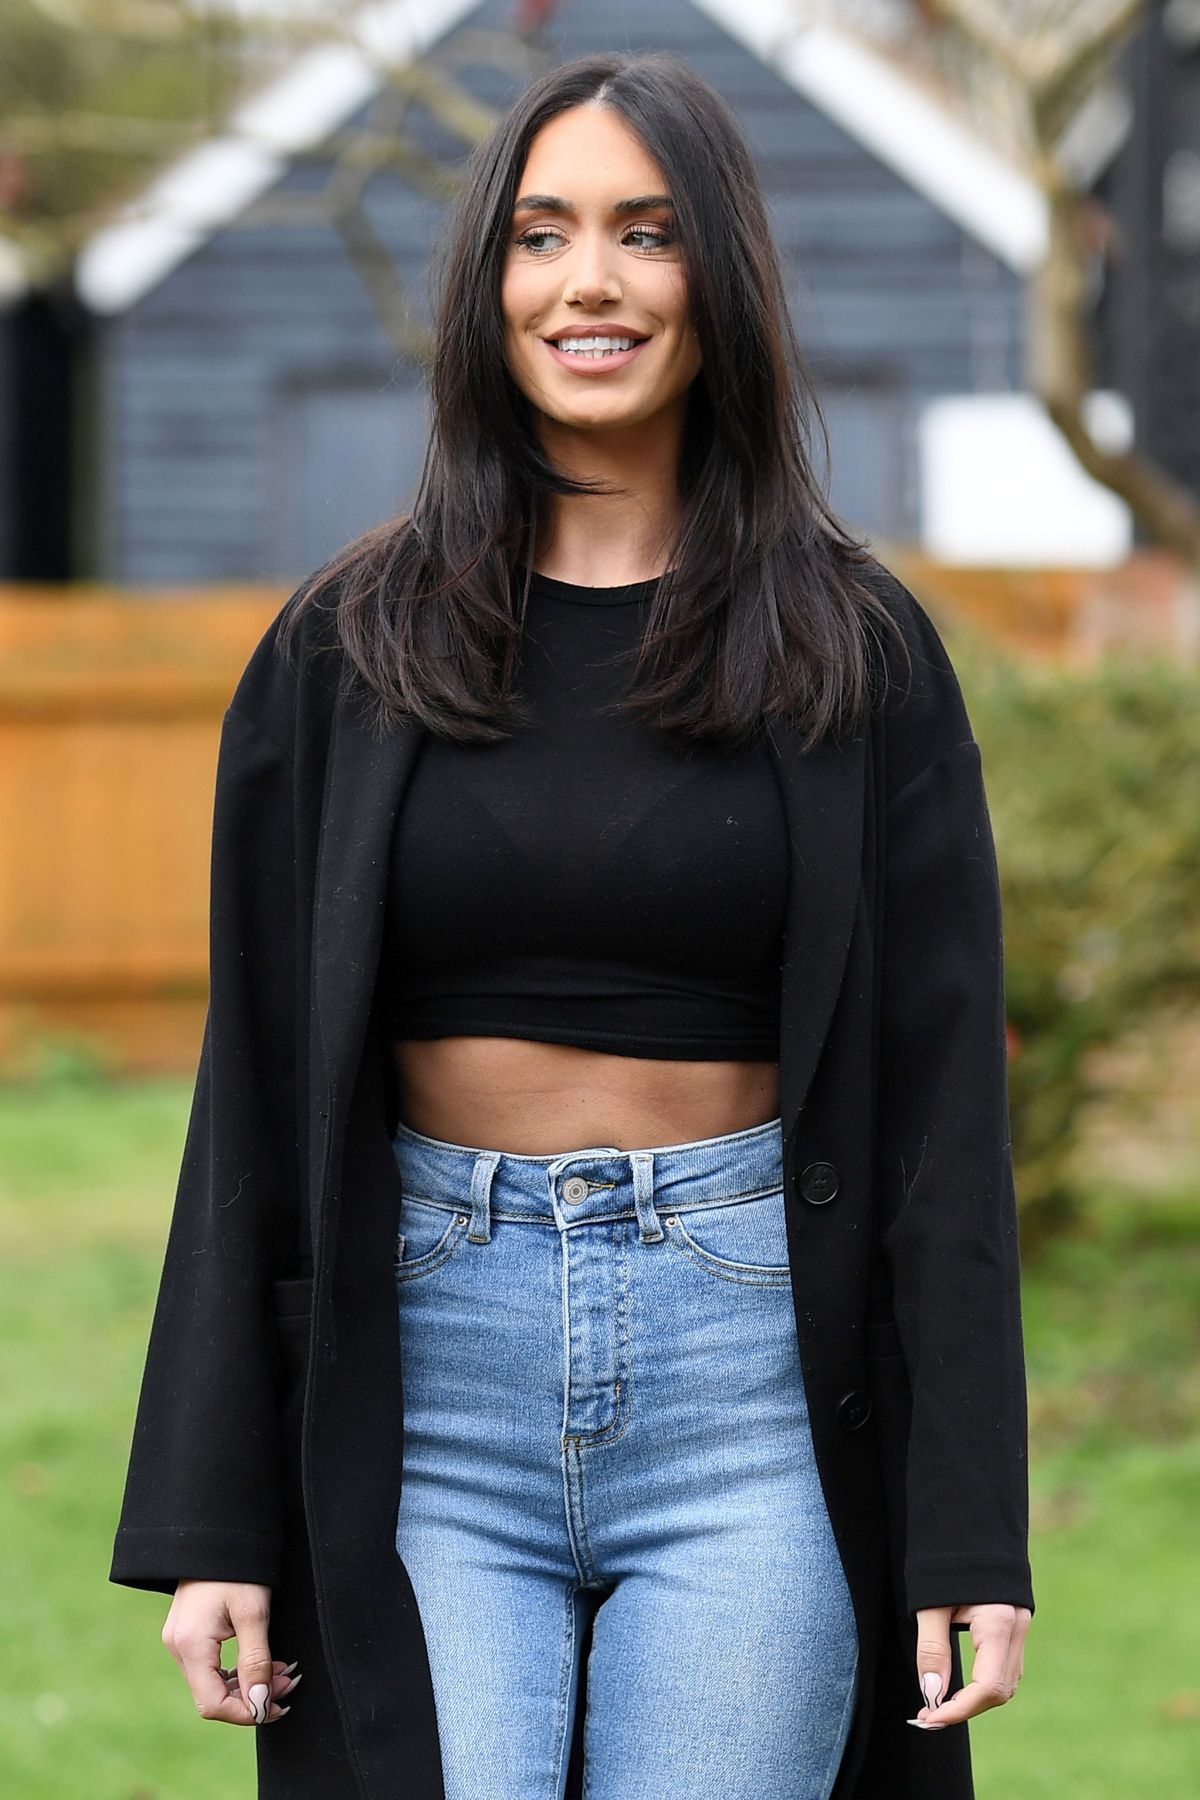 Clelia Theodorou On The Set Of The Only Way Is Essex